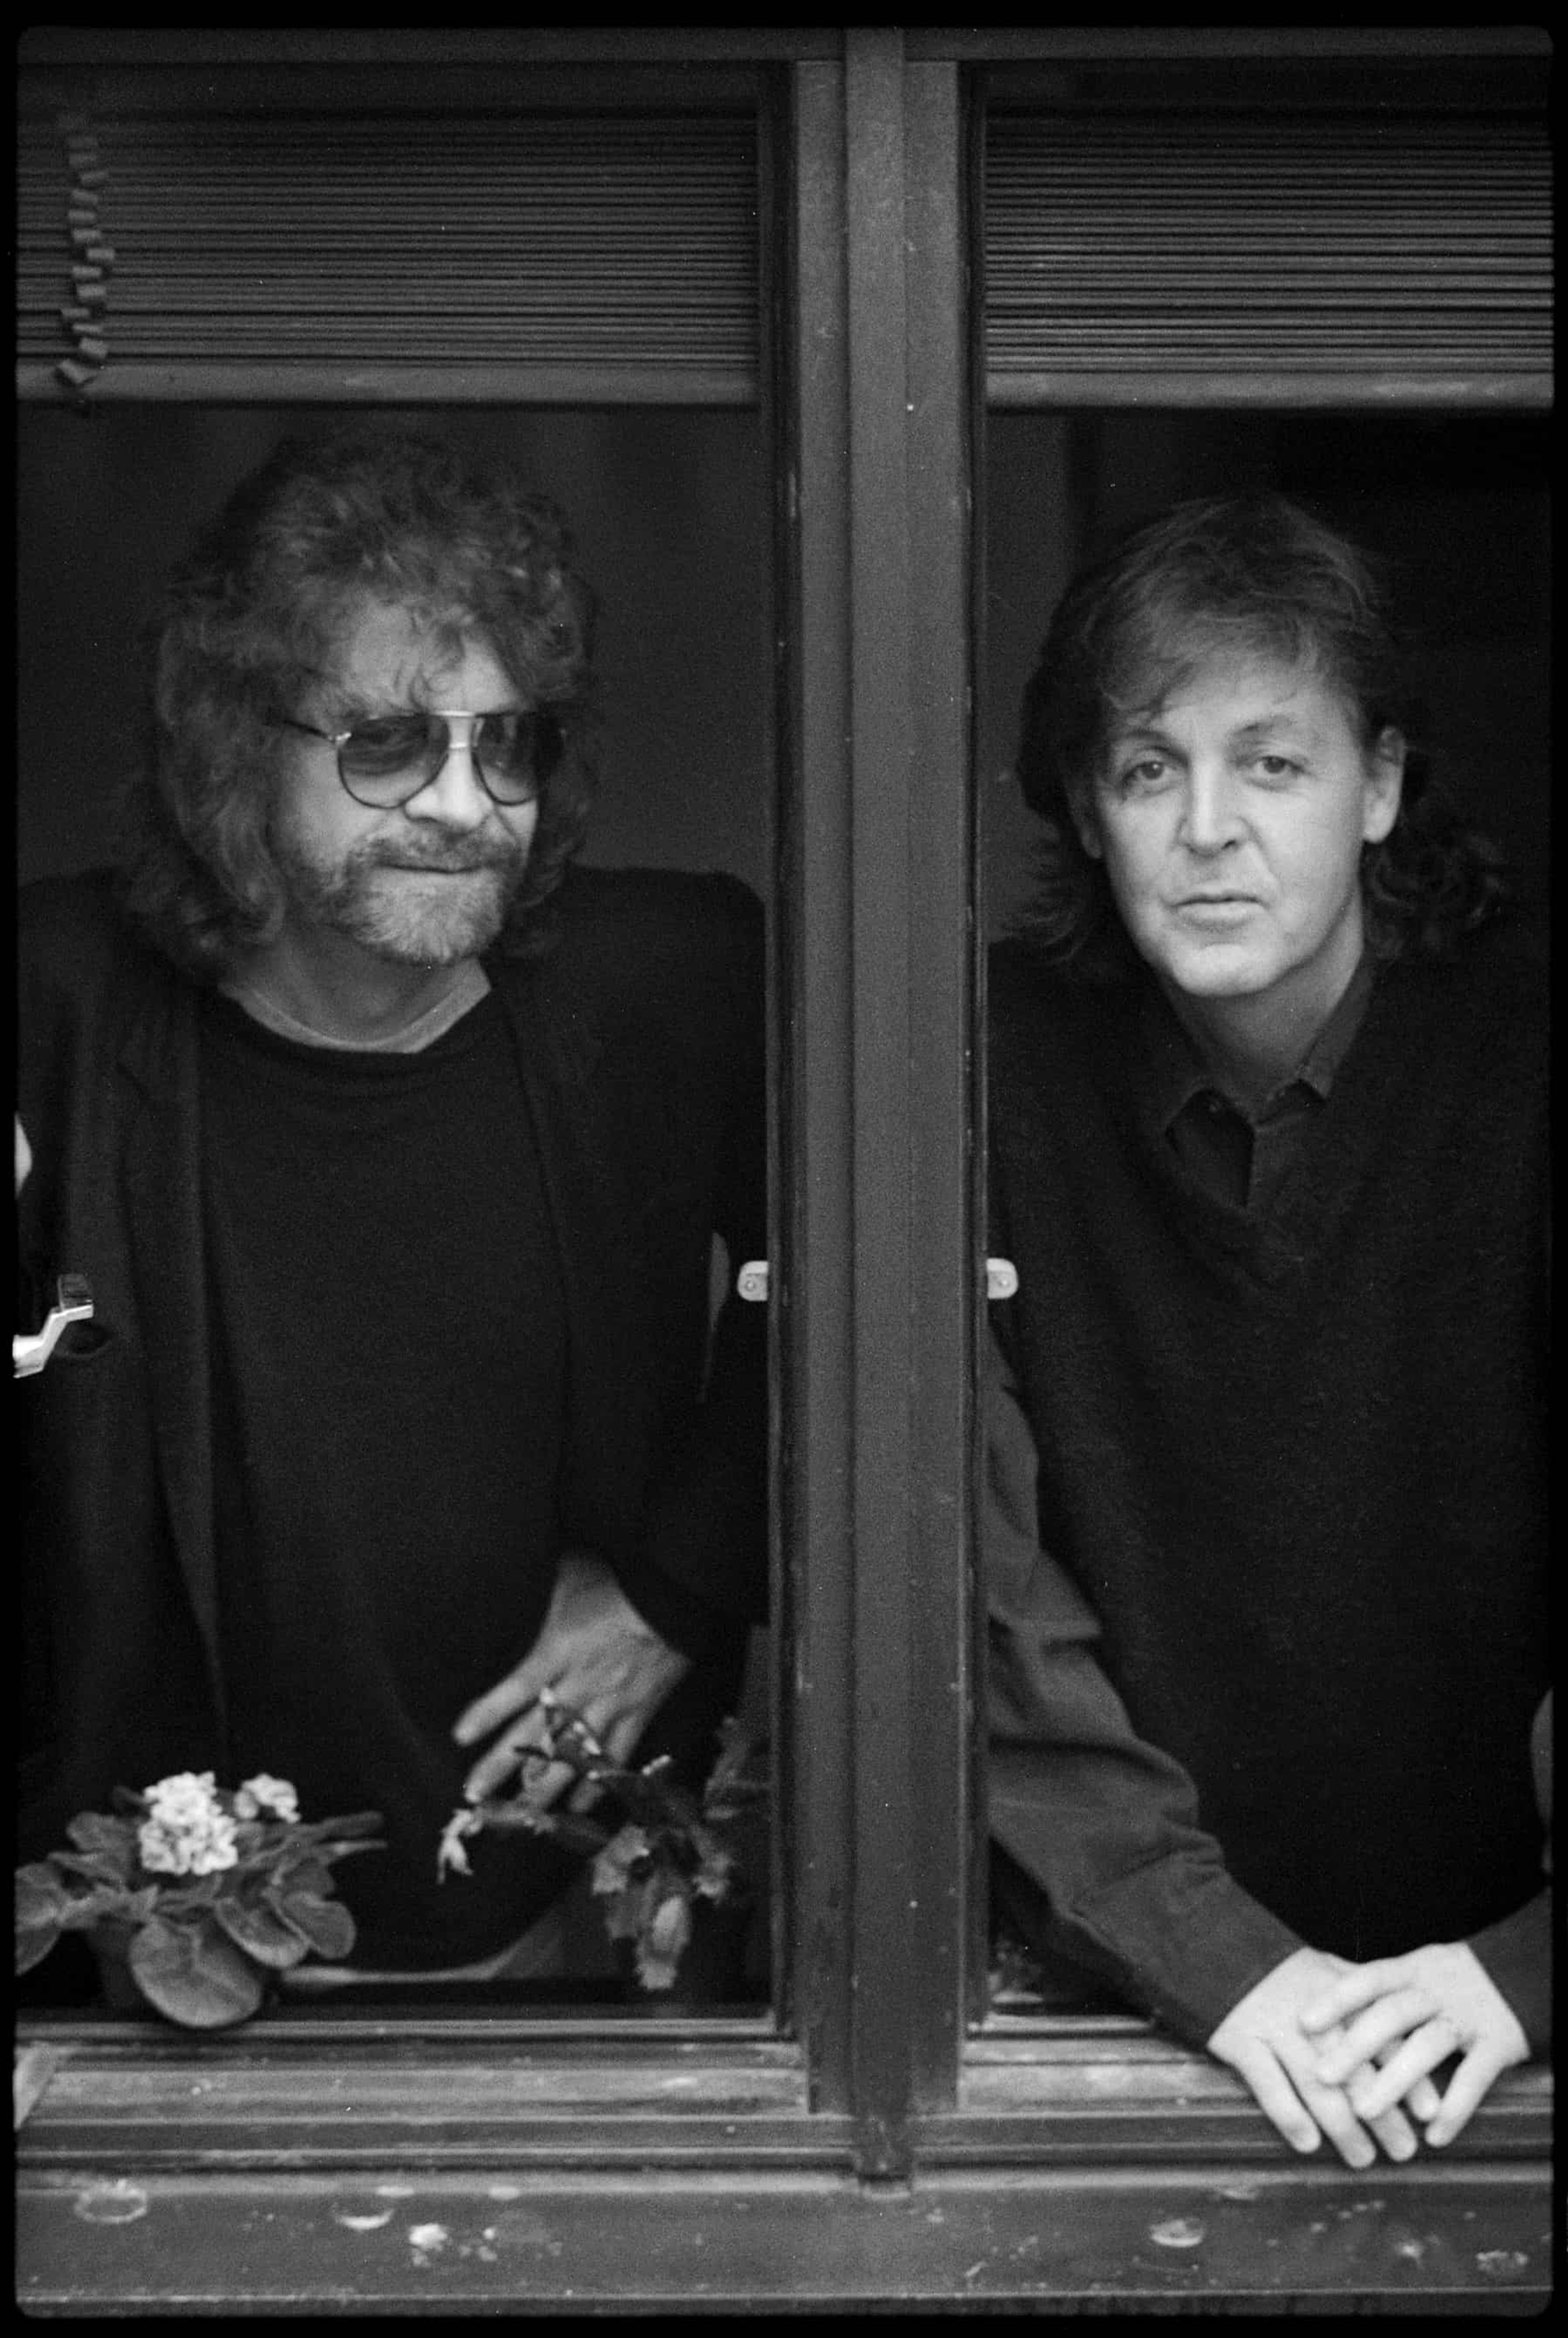 A black and white photo of Paul McCartney and Jeff Lynne during the recording sessions for 'Flaming Pie'